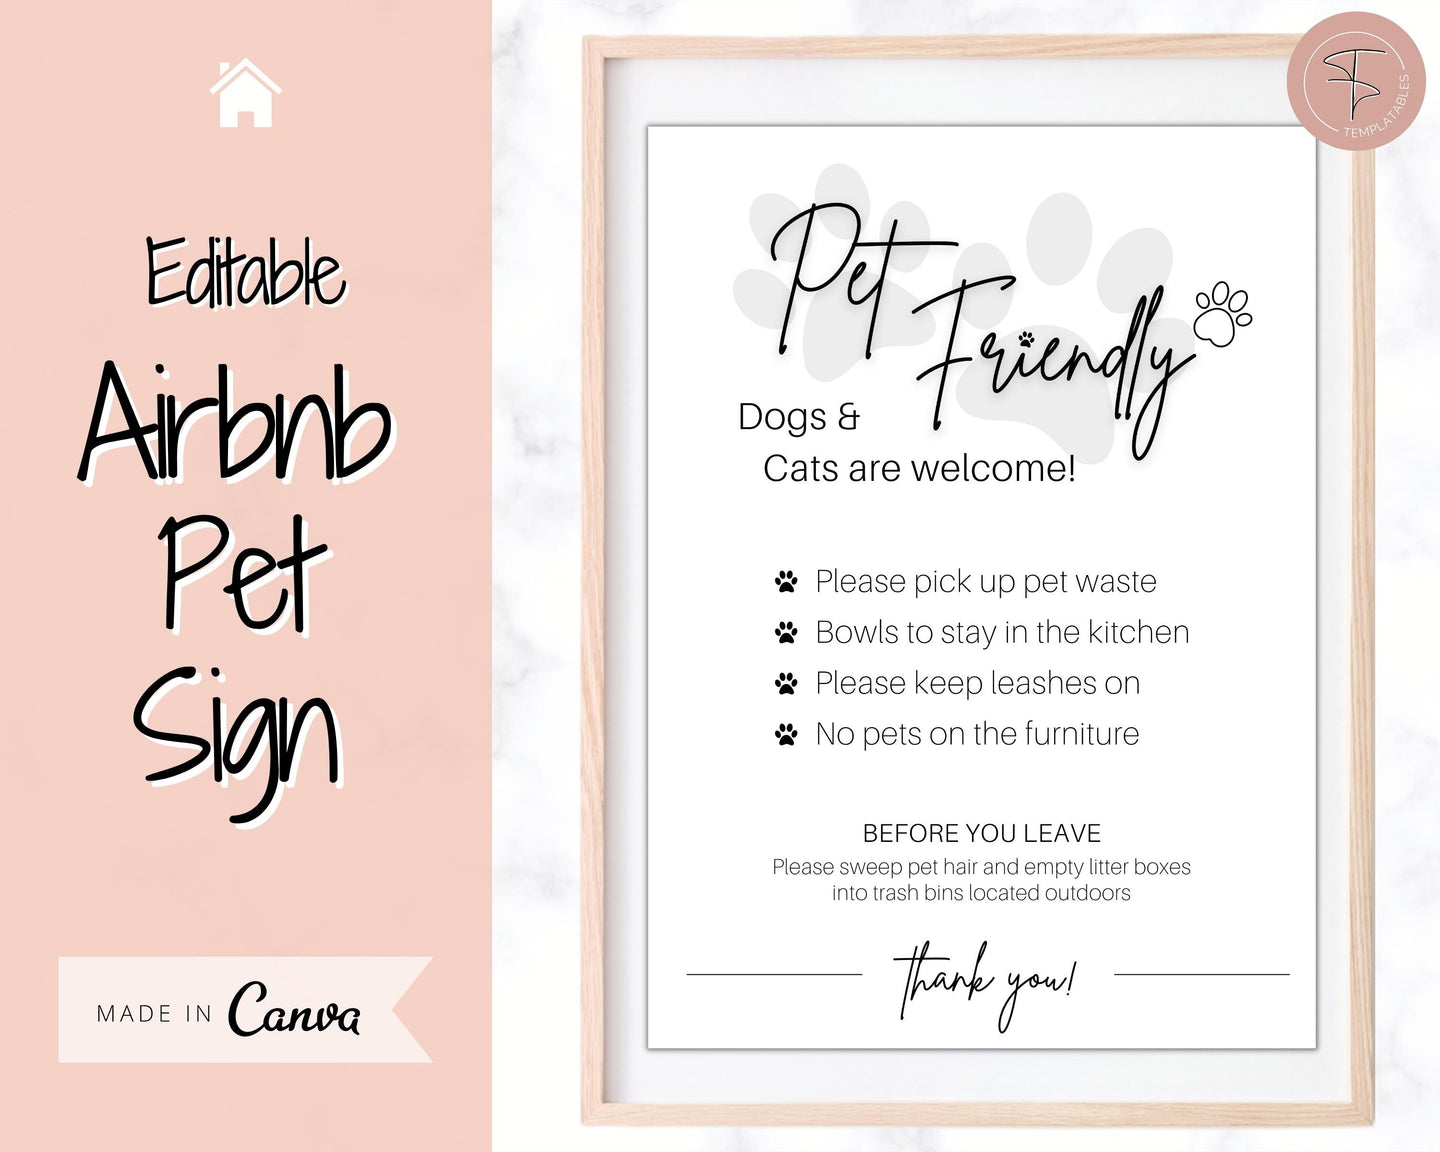 Airbnb PET Sign! Editable Airbnb Template, House Rules Poster, Airbnb Welcome Book, Super Host, Vacation Rental Signage, VRBO STR Air bnb, Policy